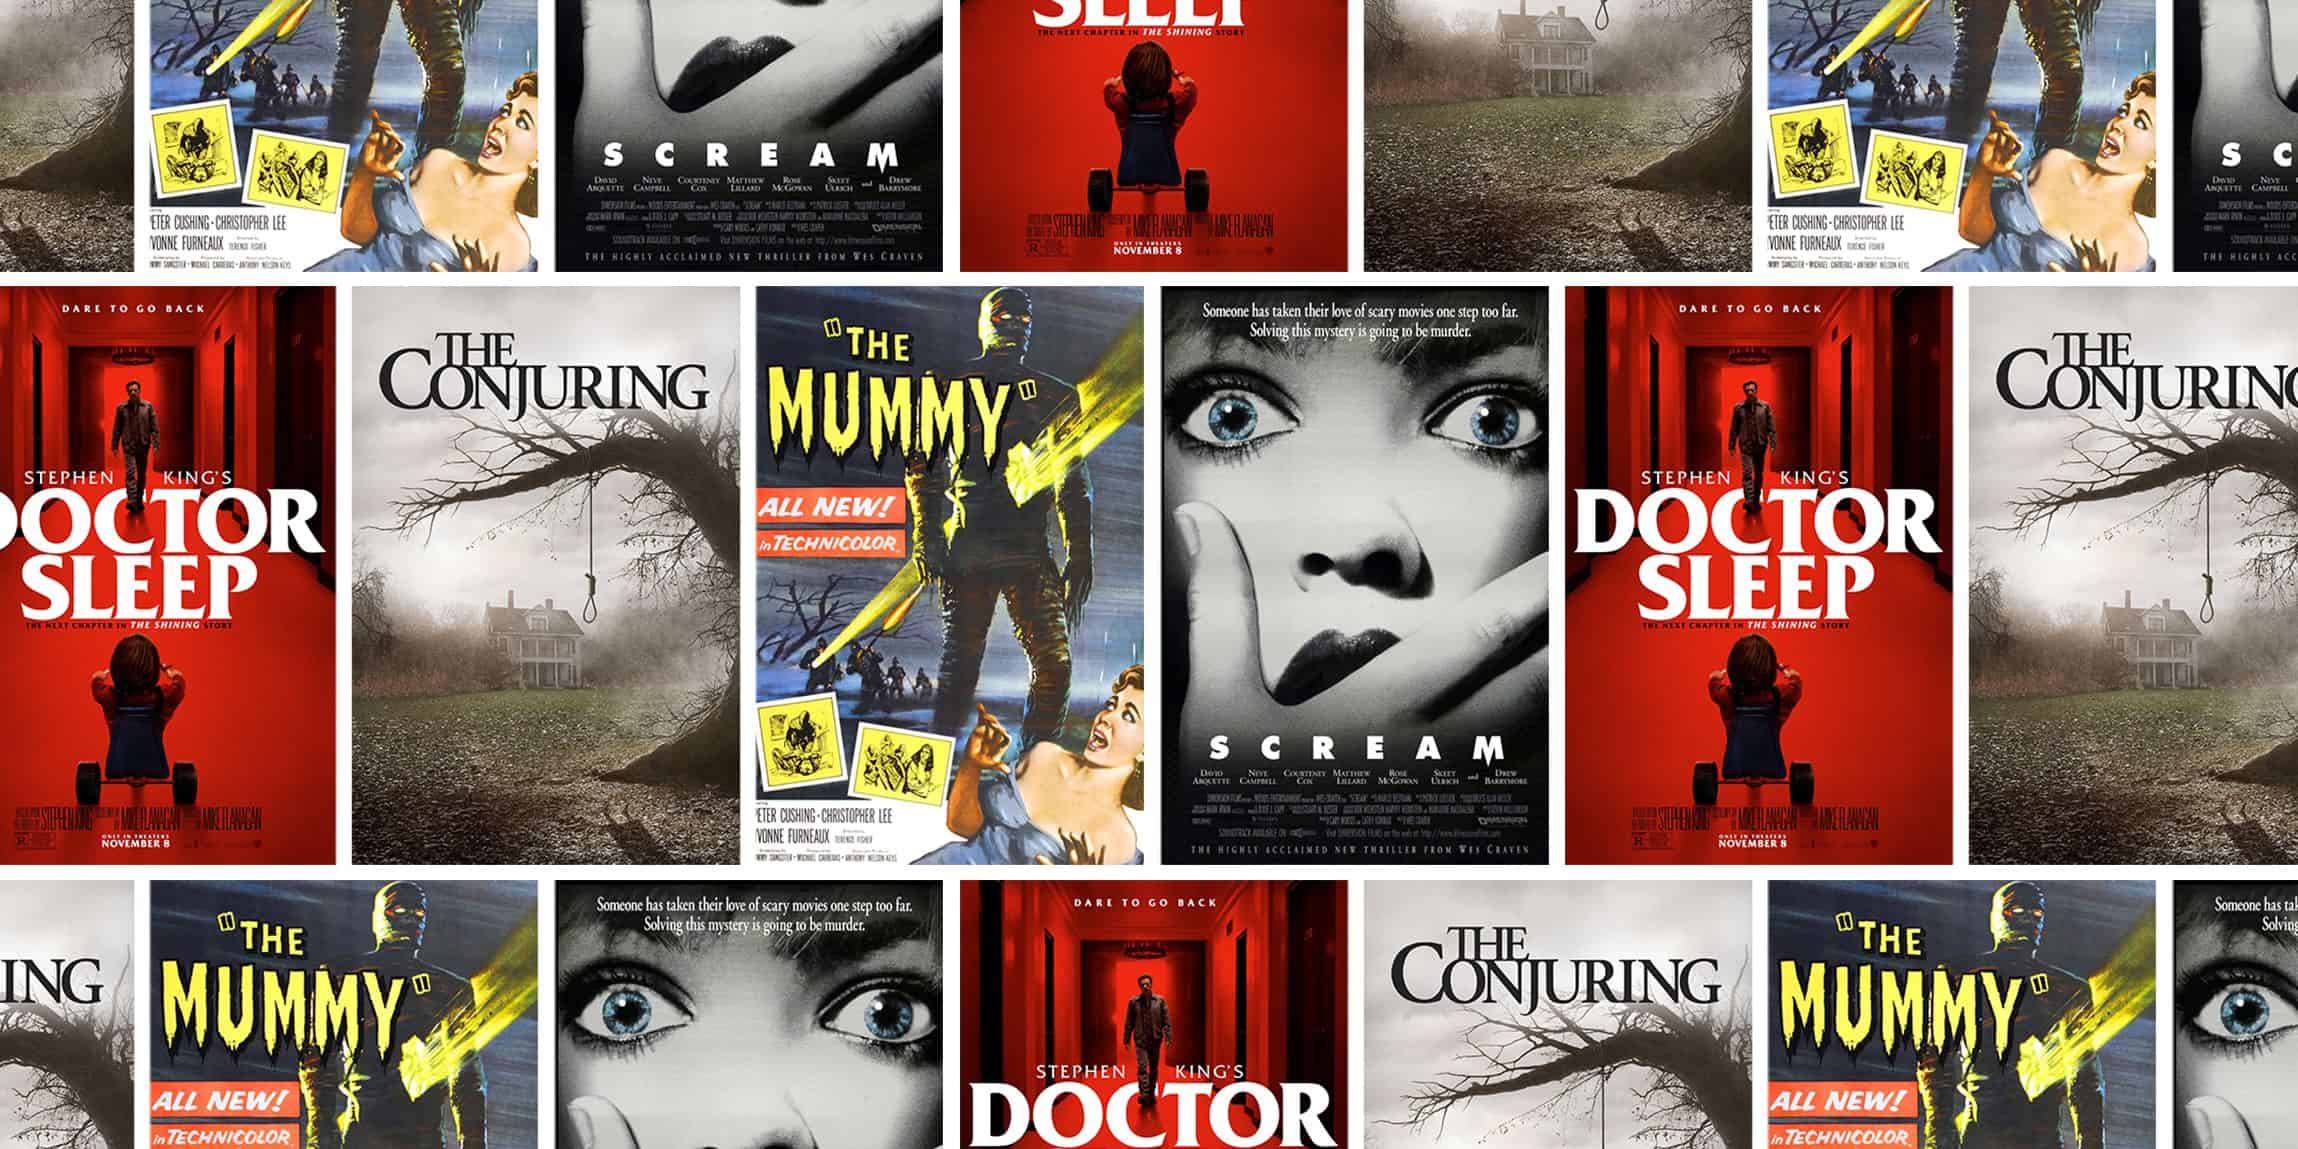 38 horror movies based on true story